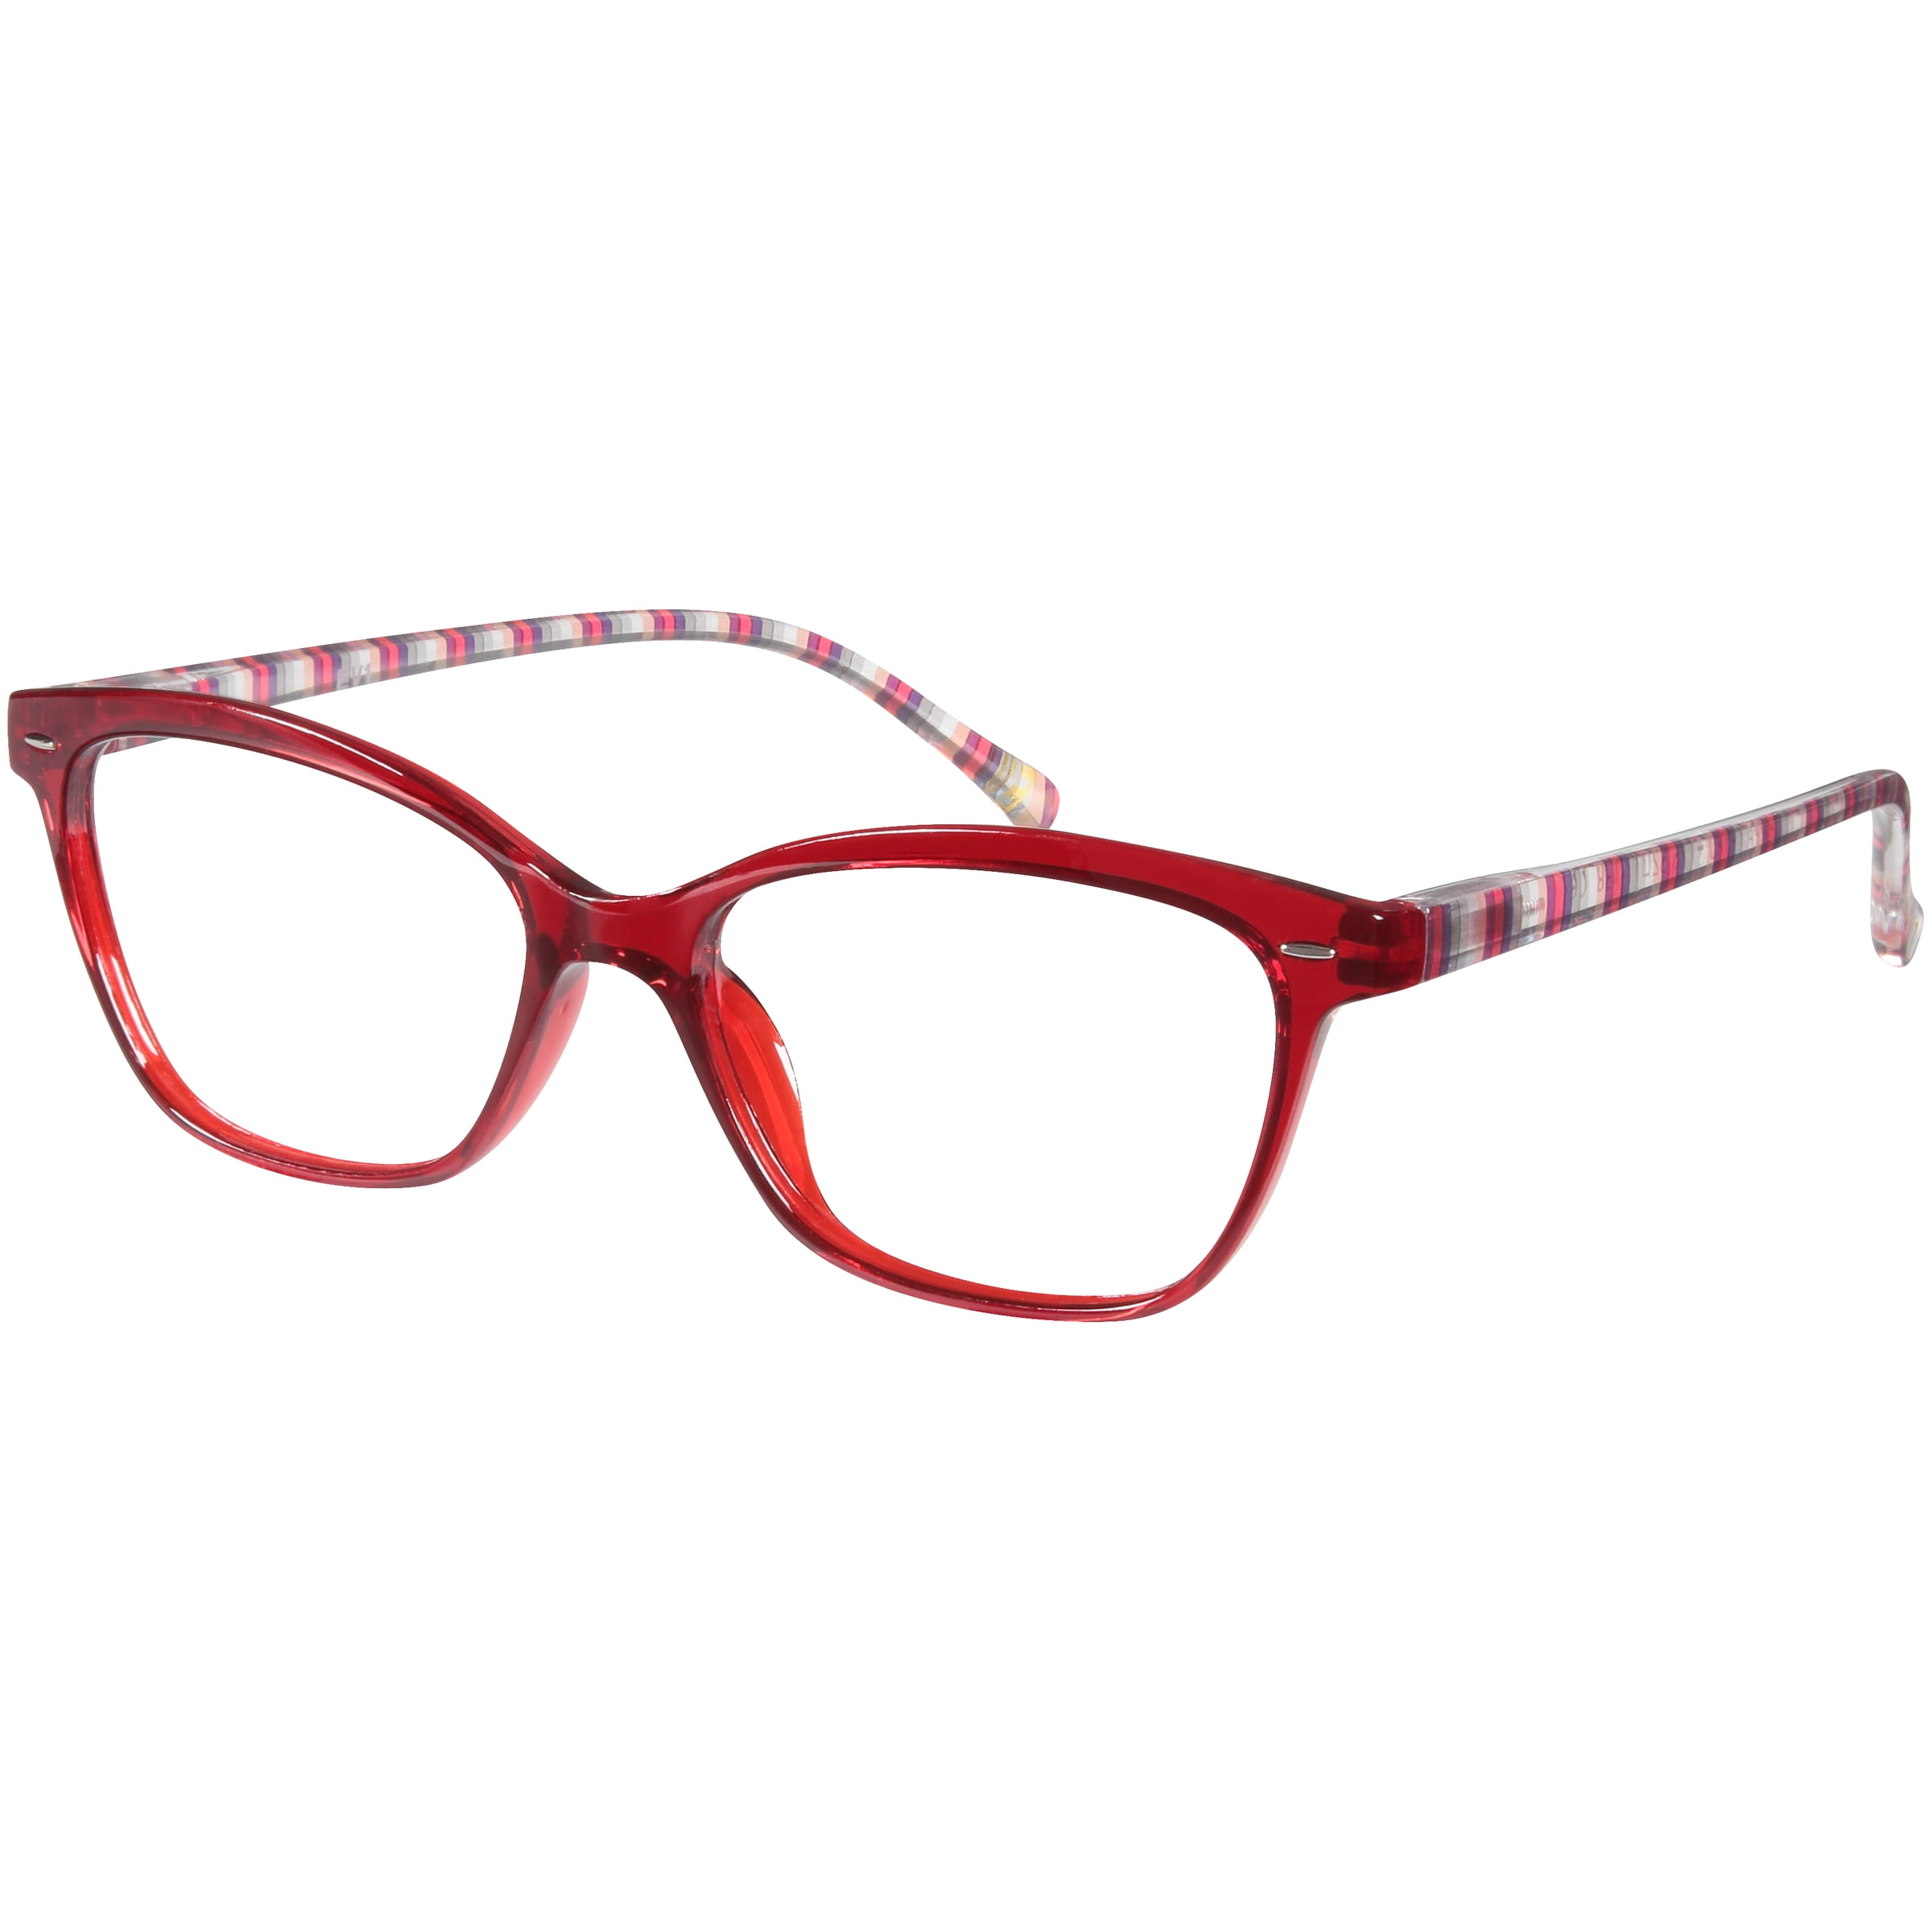 EV1 Pippa Crystal Red +2.00 Reading Glasses with Case